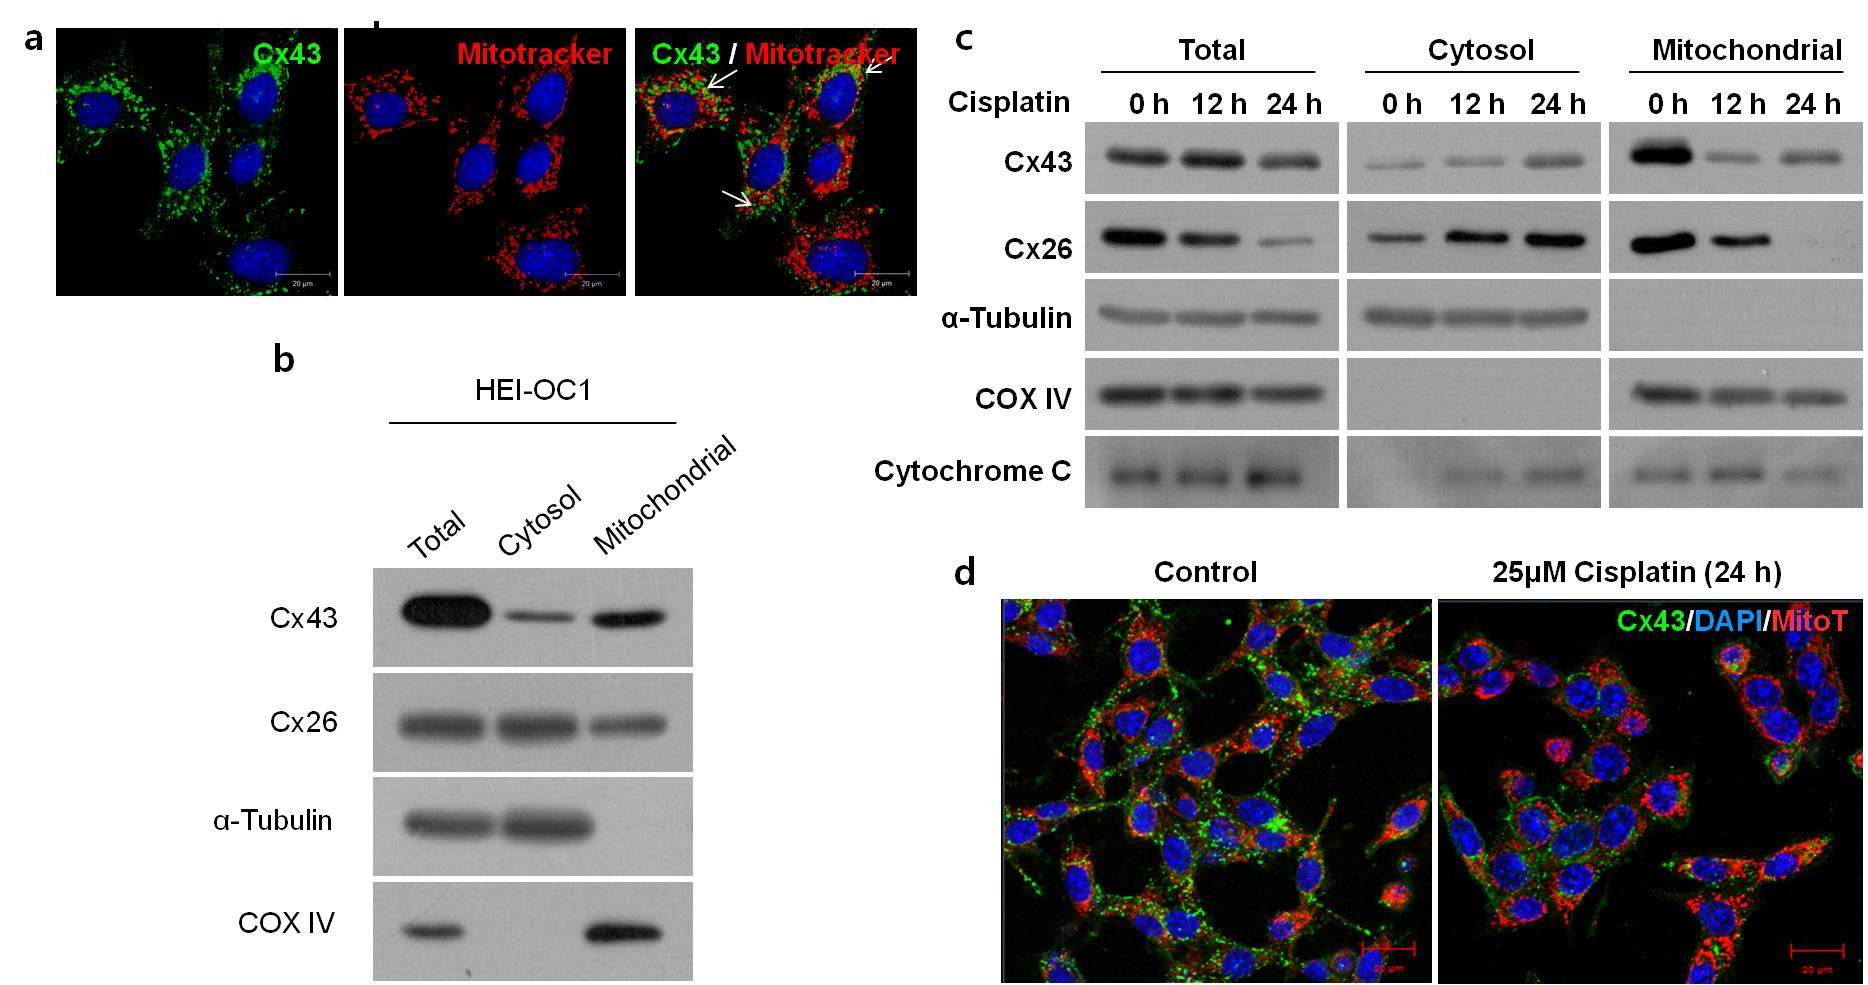 Fig 6. Downregulation of Mitochondrial Cx43 by cisplatin in HEI-OC1 cells.